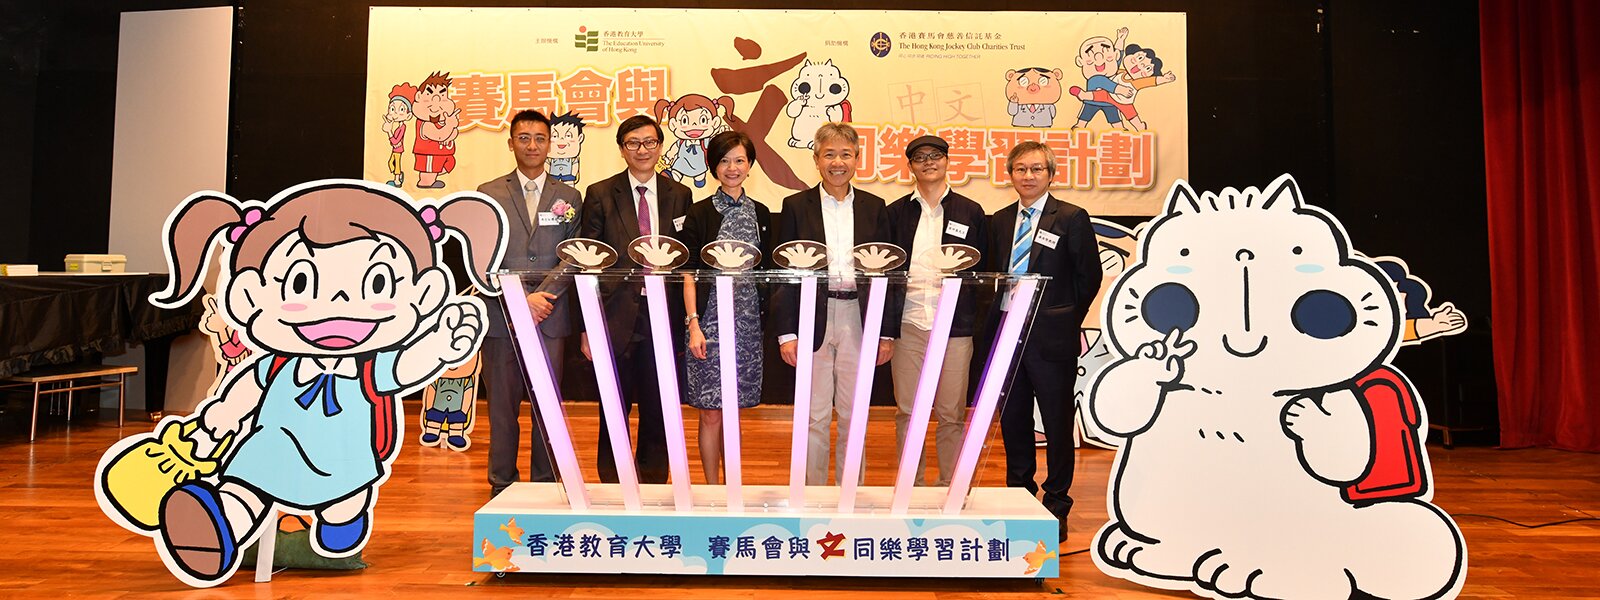 Launch of EdUHK’s “Jockey Club from Words to Culture Programme: an Animated Way to Learn Chinese” Project